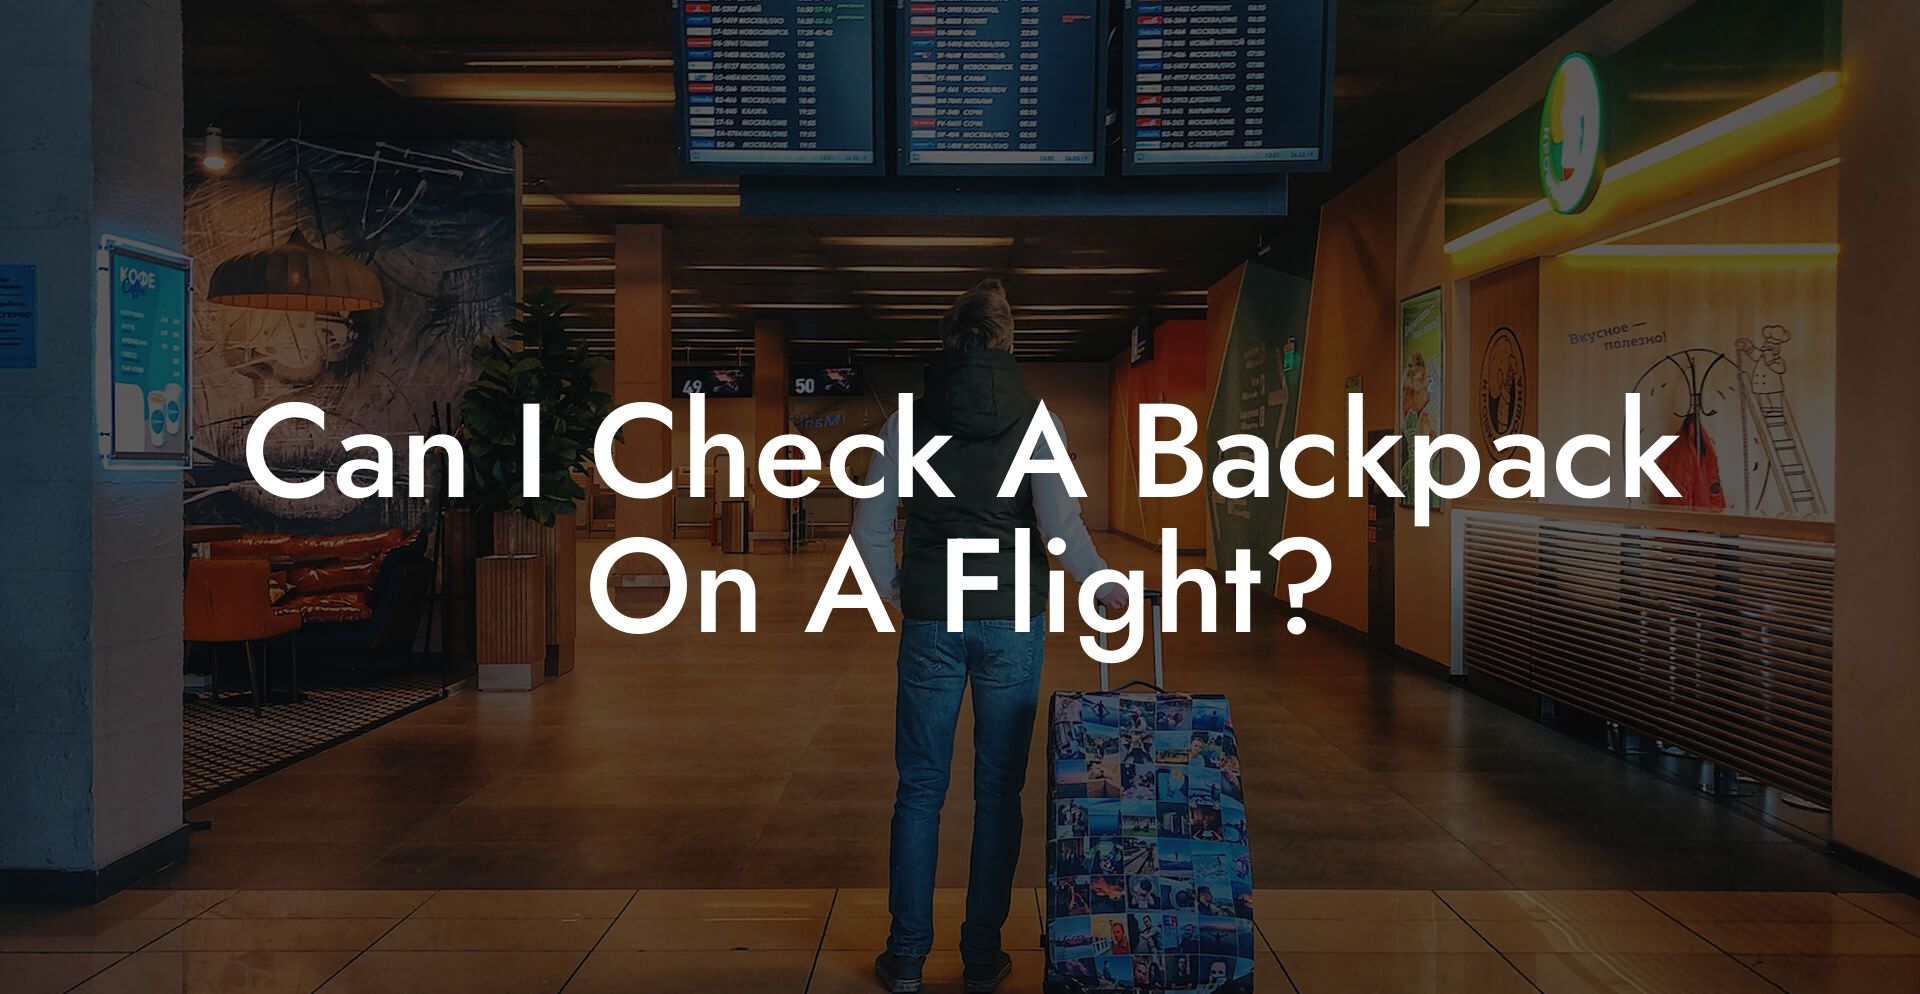 Can I Check A Backpack On A Flight?